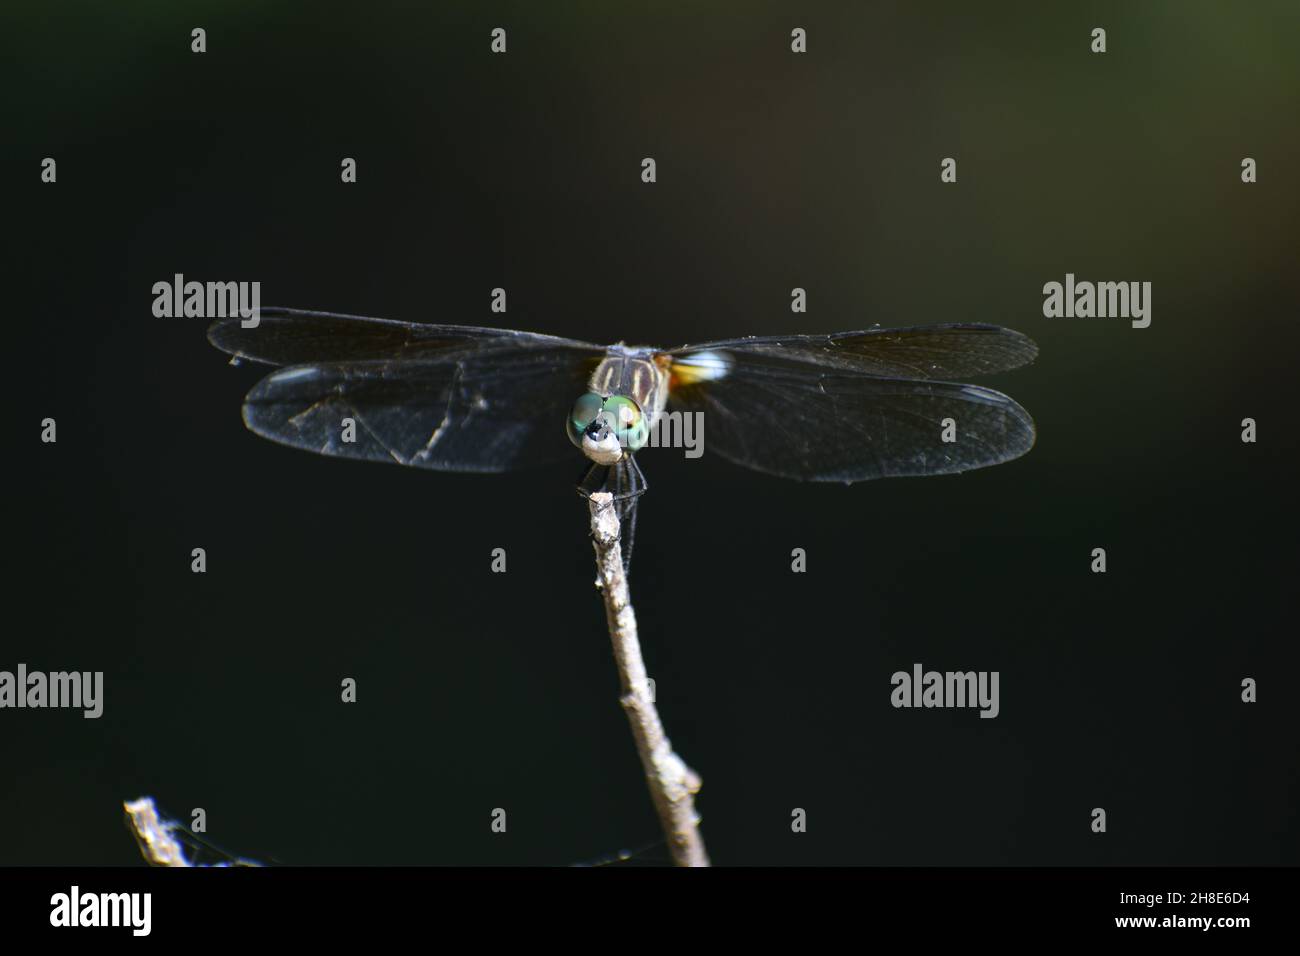 Close-up of a large dragonfly with transparent wings and compound eyes. Stock Photo